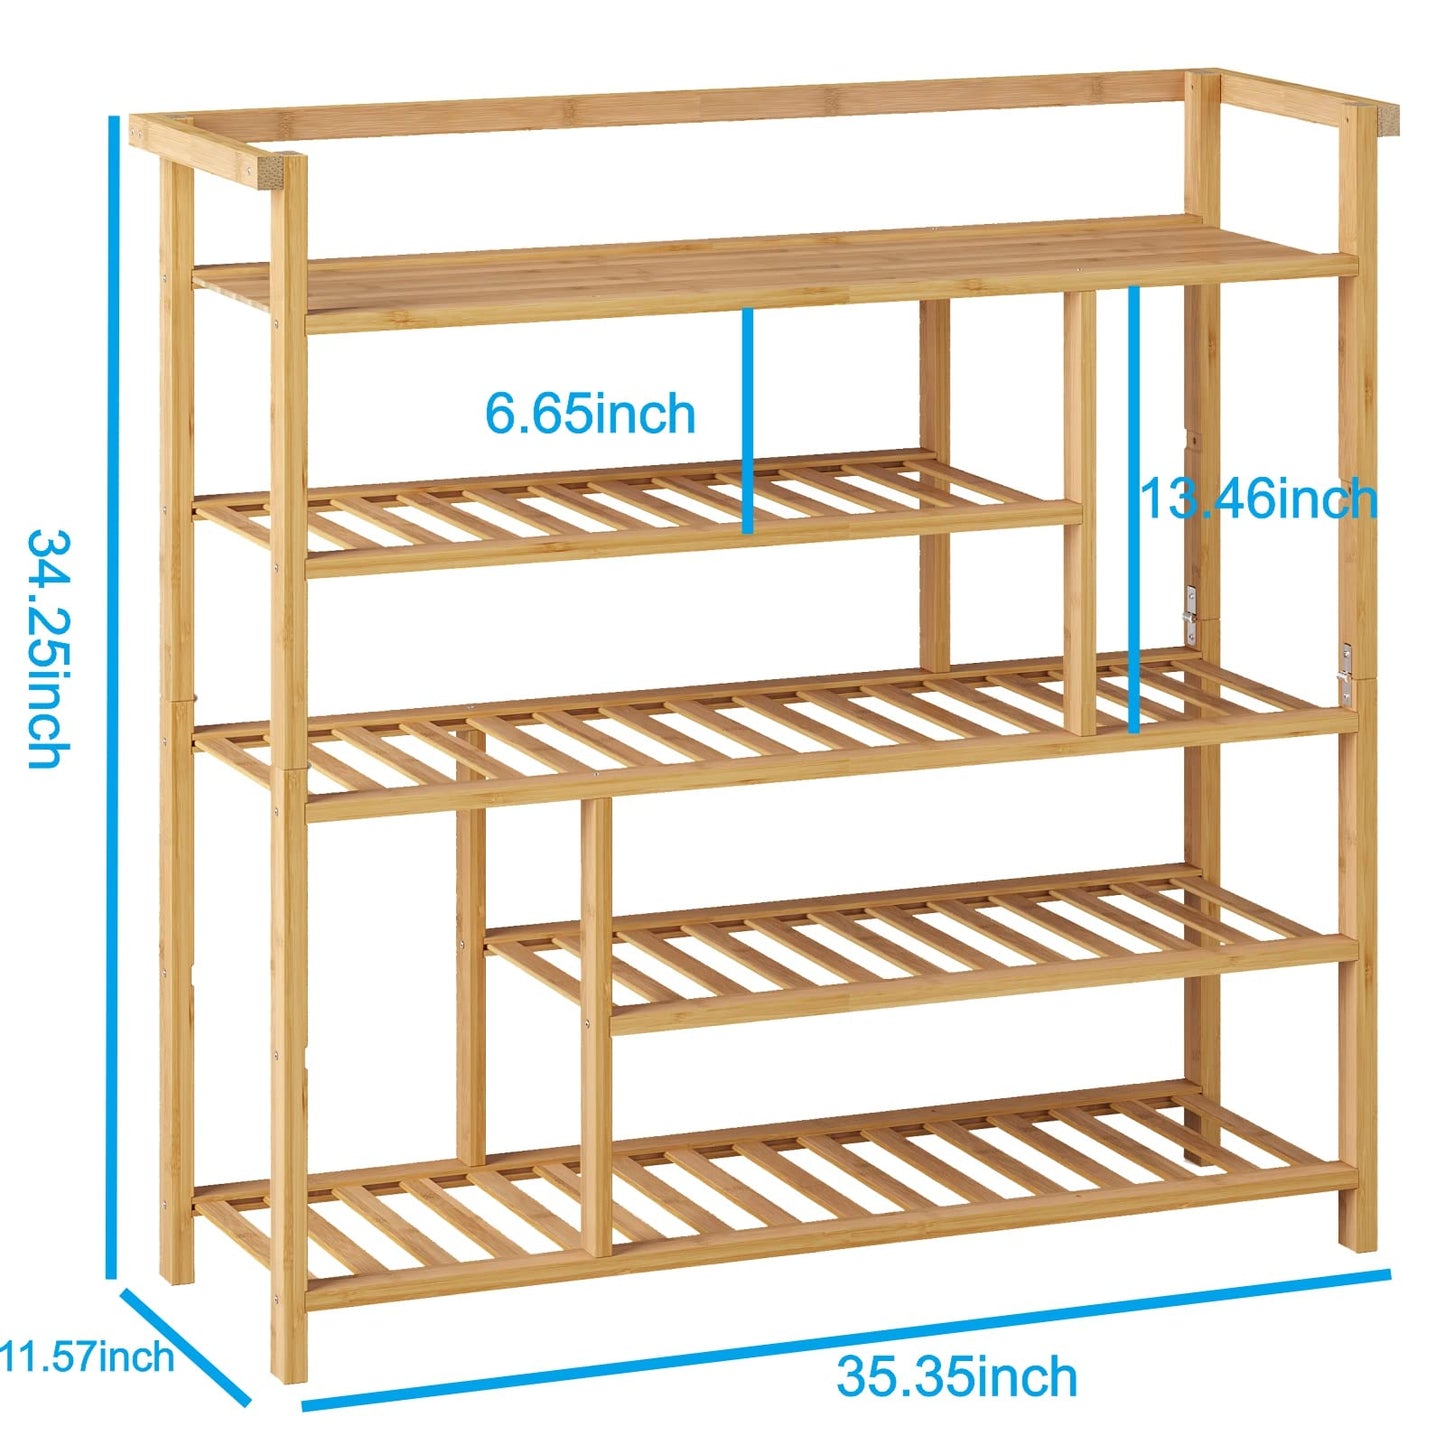 Fibogollo Shoe Rack, 5 Tier Bamboo Shoe Shelf, Shoe Organizers with Spacious Top, Large Shoes Rack for Closet, Entryway, Bedroom(Natural)